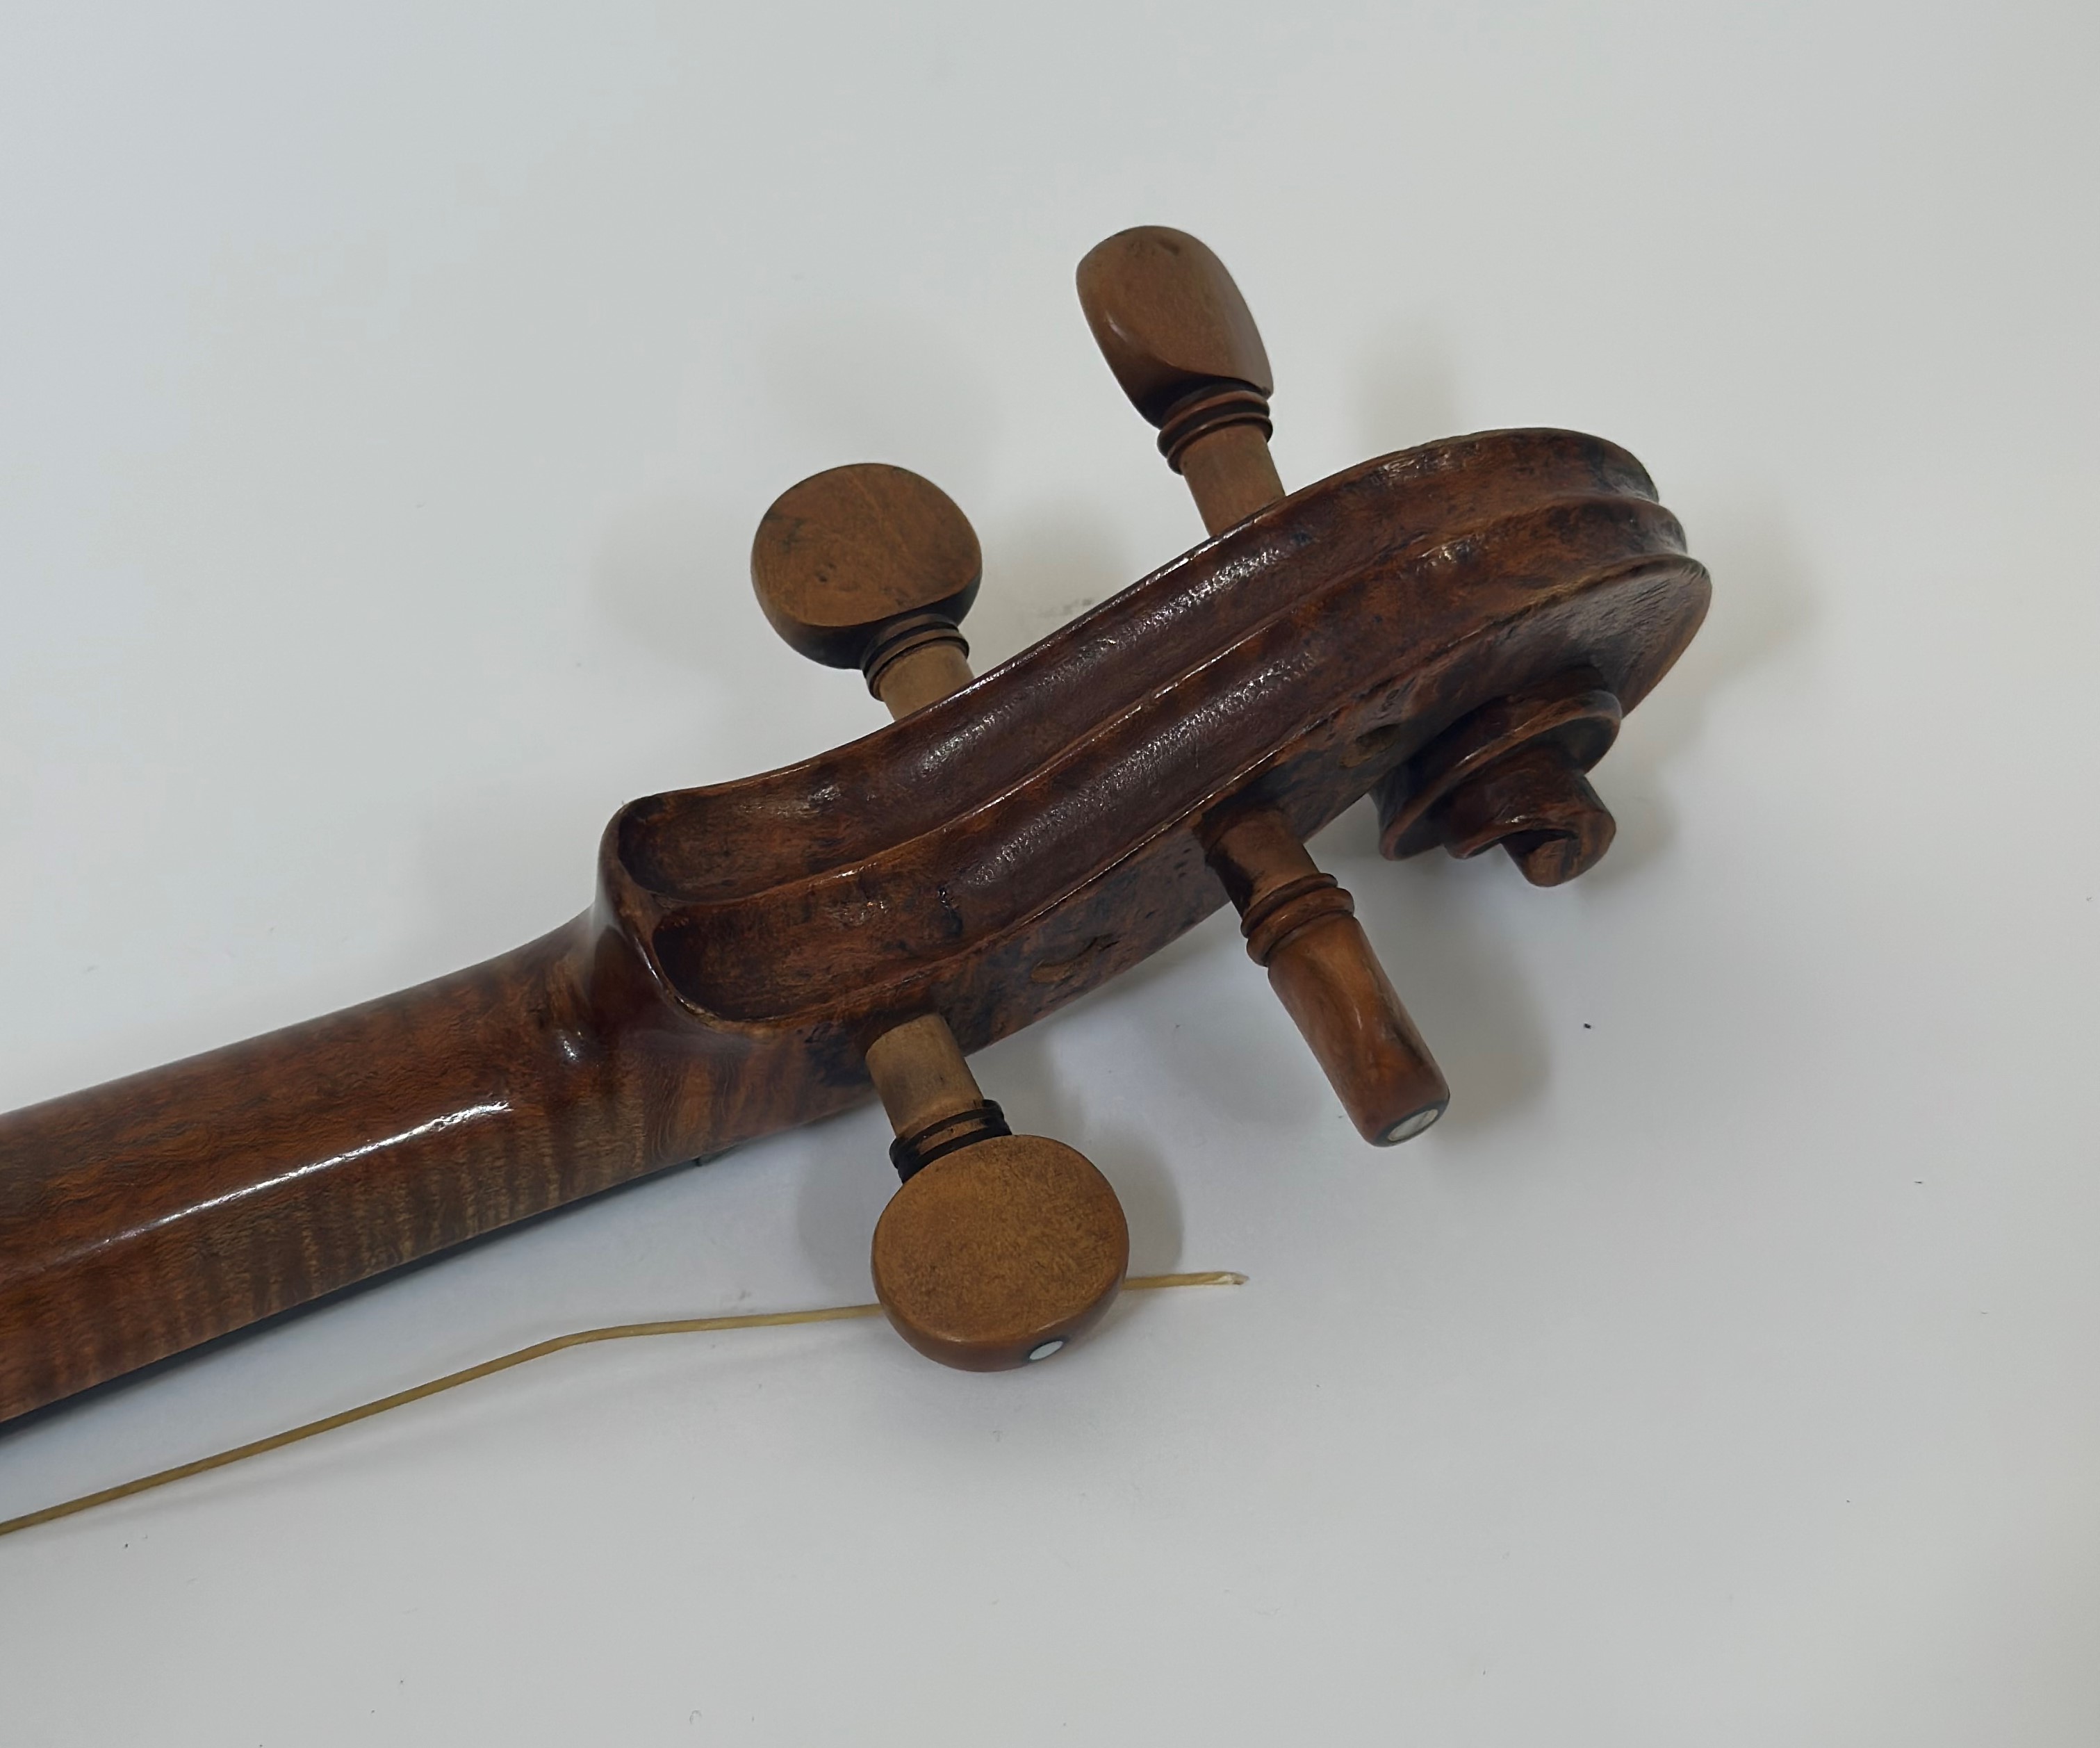 A 19th century violin, possibly Scottish, with two piece back, mother-of-pearl inlaid tailpiece, - Image 5 of 5